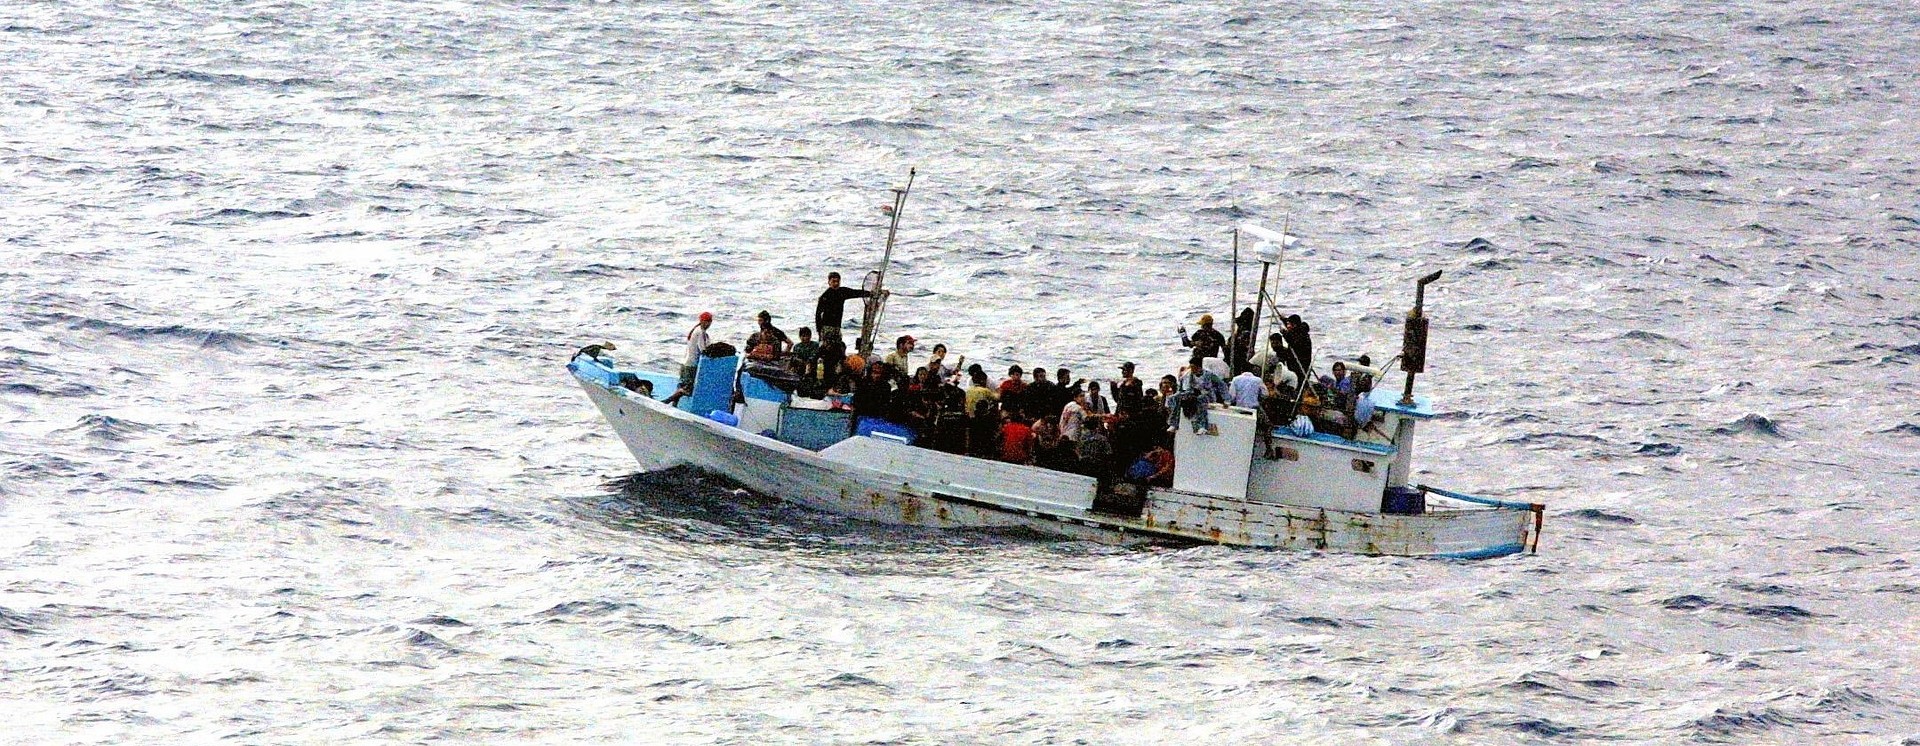 Small boat filled with people on the sea.